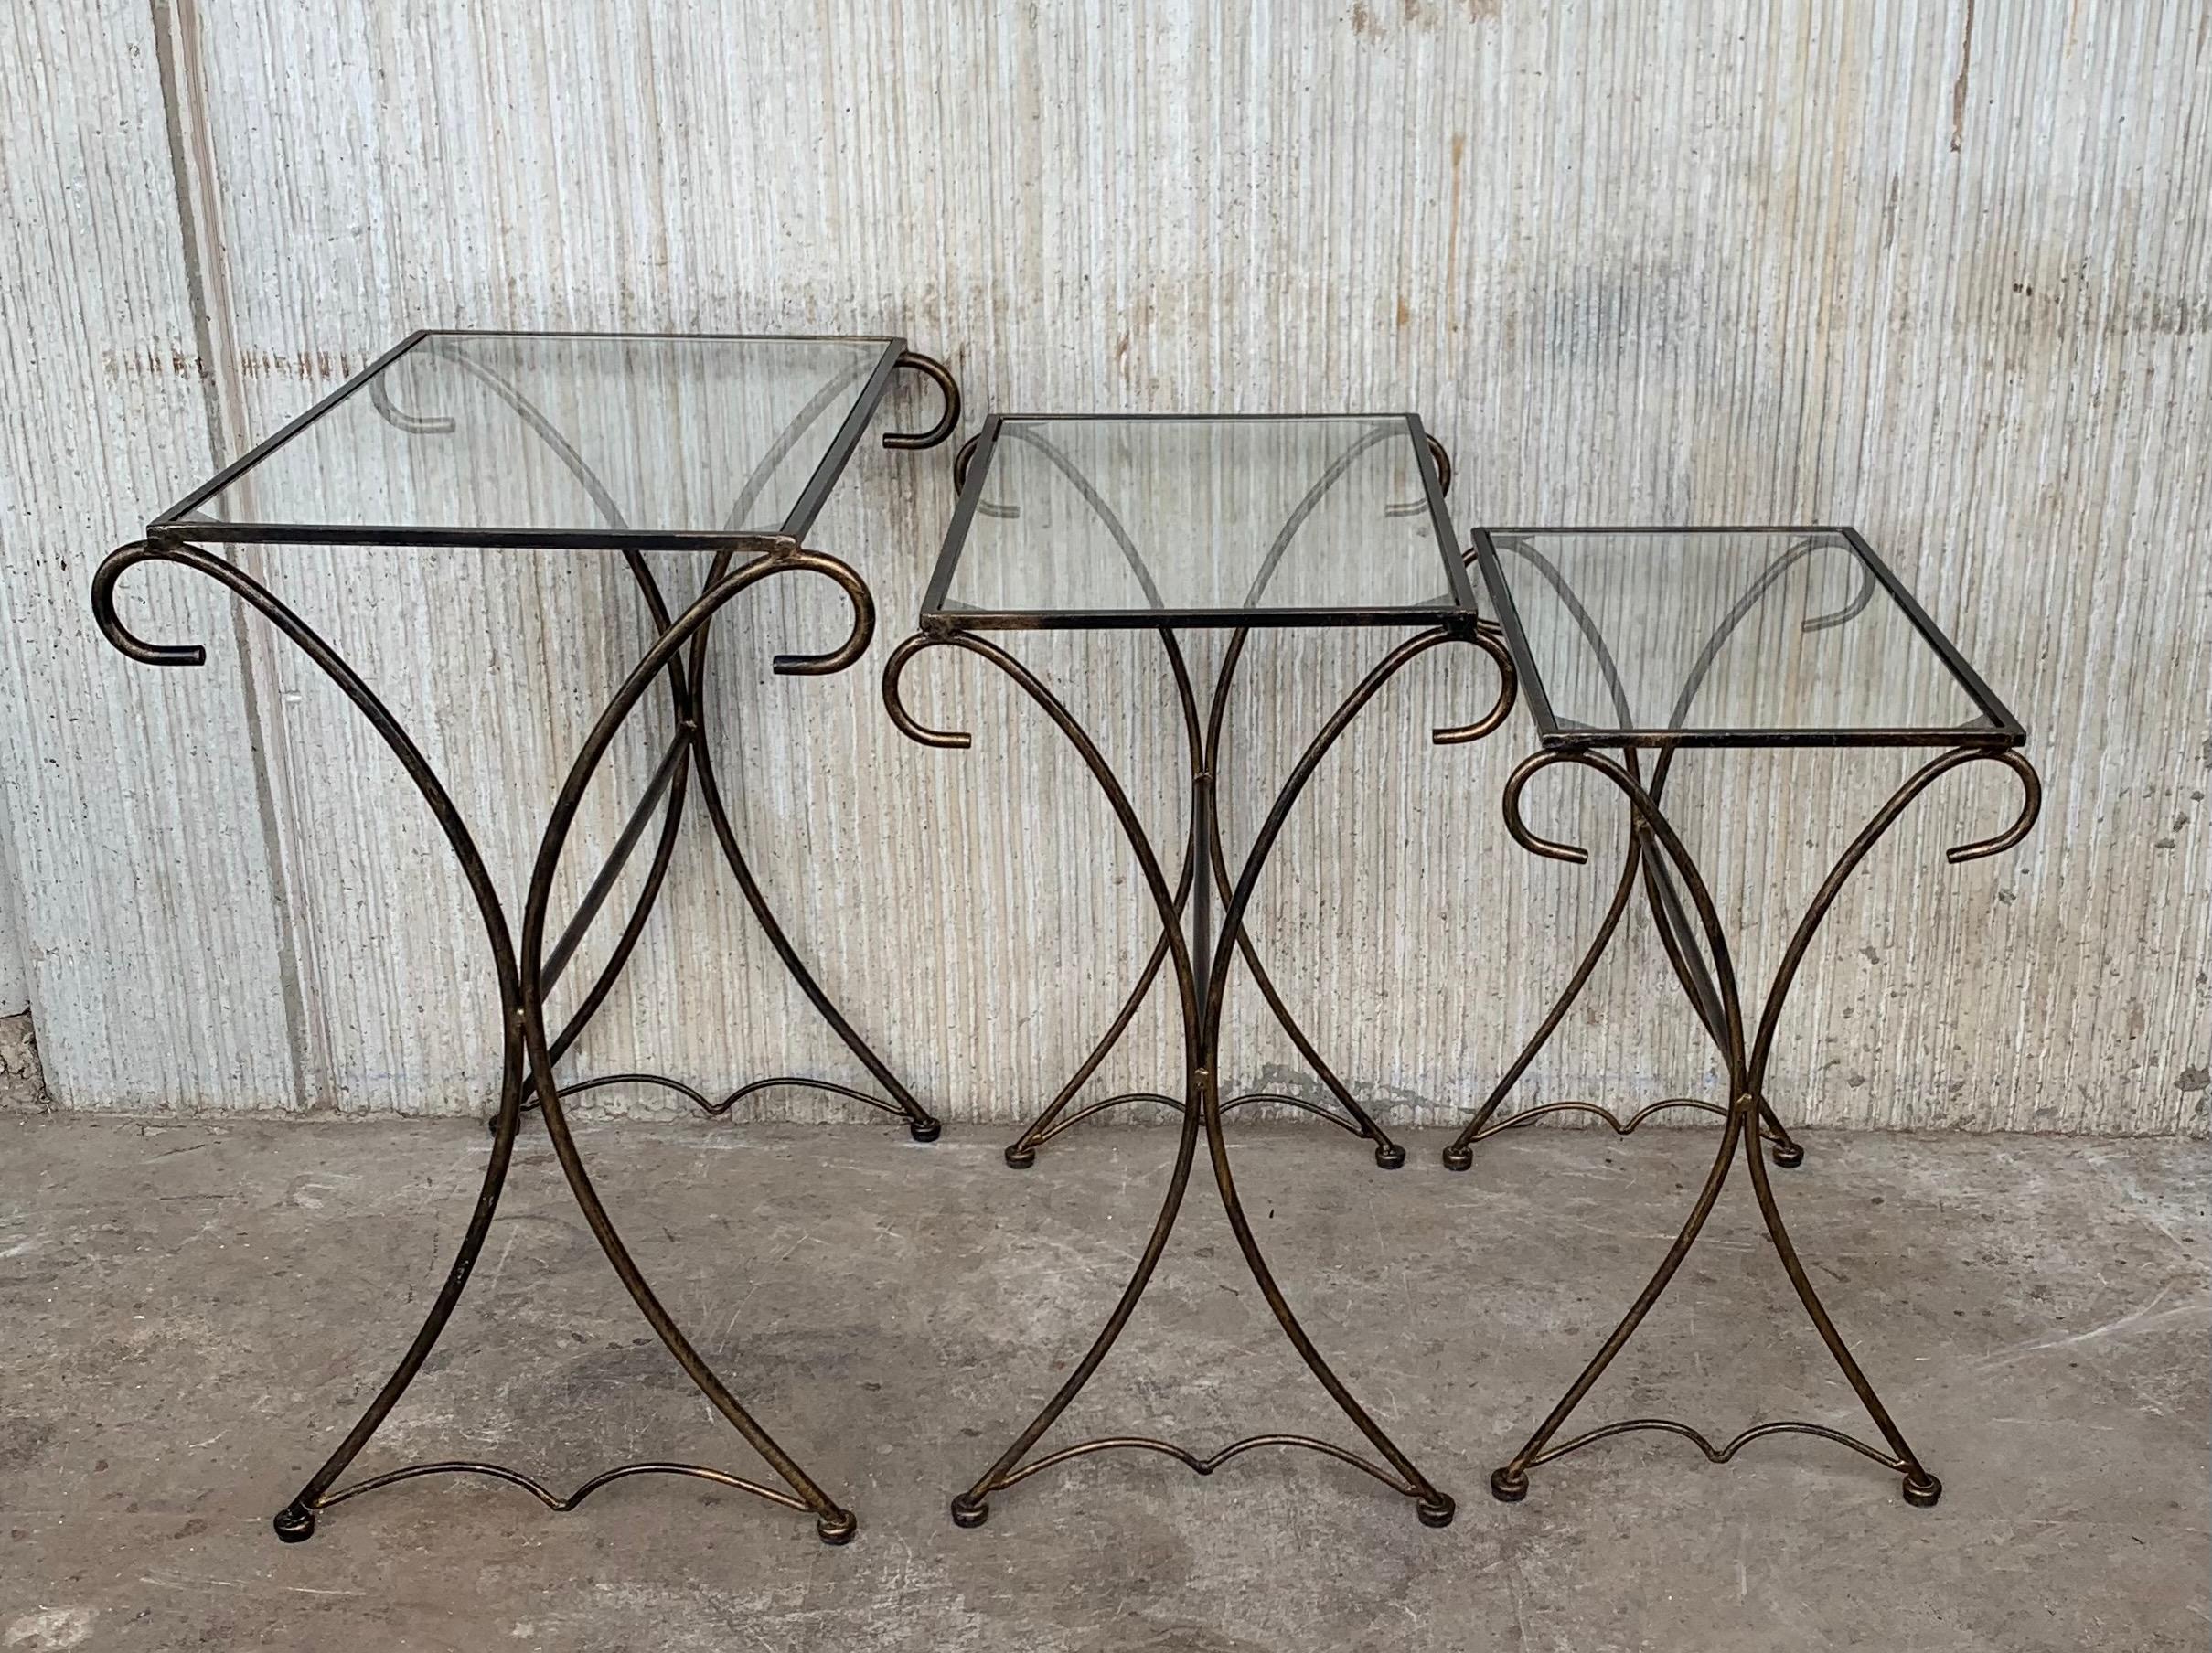 Baroque Midcentury Scrolling Iron Patio Nesting Side Tables with Glass Tops, Set of 3 For Sale